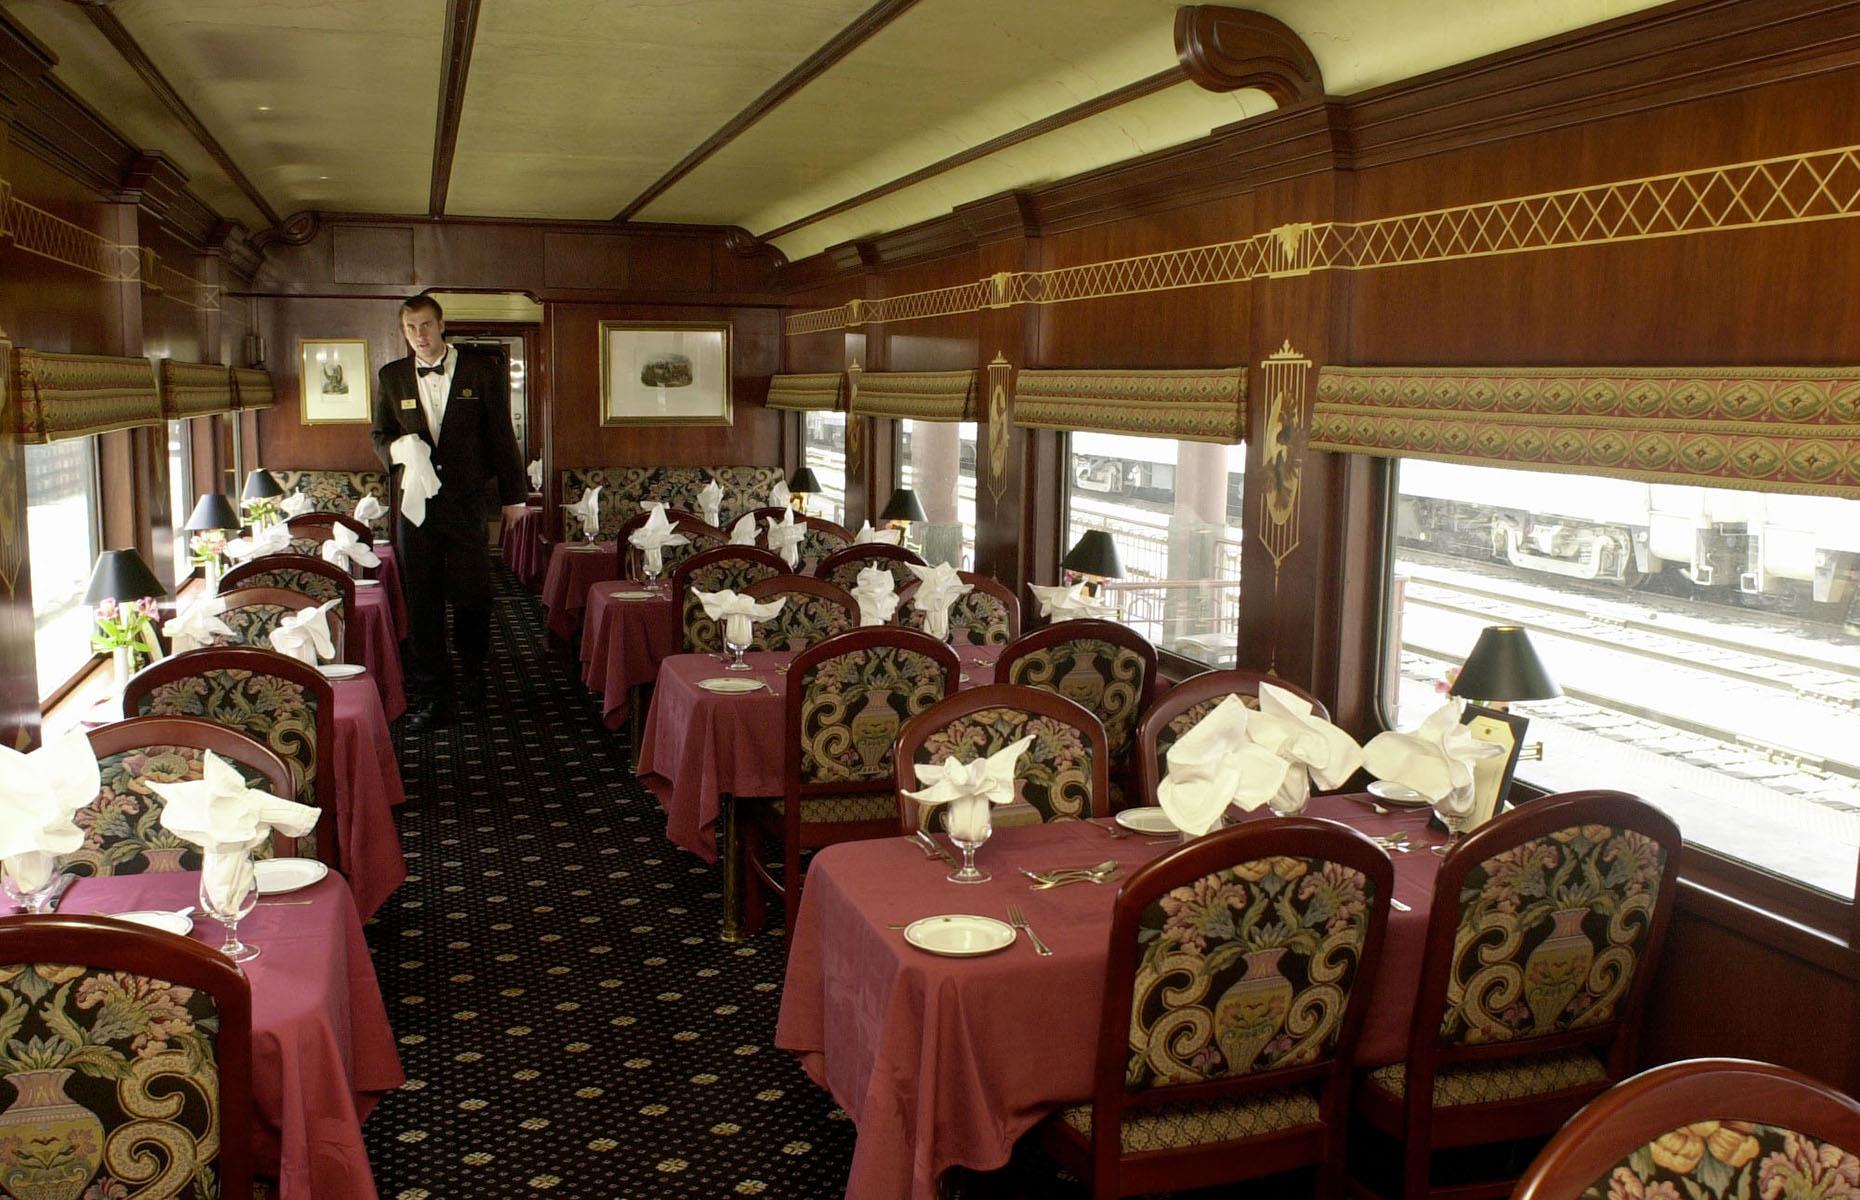 <p>A new incarnation of the famous train, the American Orient Express, formerly the American European Express, operated between 1989 and 2008. A private luxury train operating under Amtrak, it offered its passengers an all-inclusive journey with meals, entertainment and hotel stays along the route. The 1940s and 1950s-era passenger cars cost nearly $15 million to restore and tickets were priced up to $10,000 per person one way. Now take a look at <a href="https://www.loveexploring.com/galleries/86683/the-worlds-most-scenic-train-journeys-that-dont-cost-a-fortune?page=1">the world's most scenic train journeys that don't cost a fortune</a>.</p>